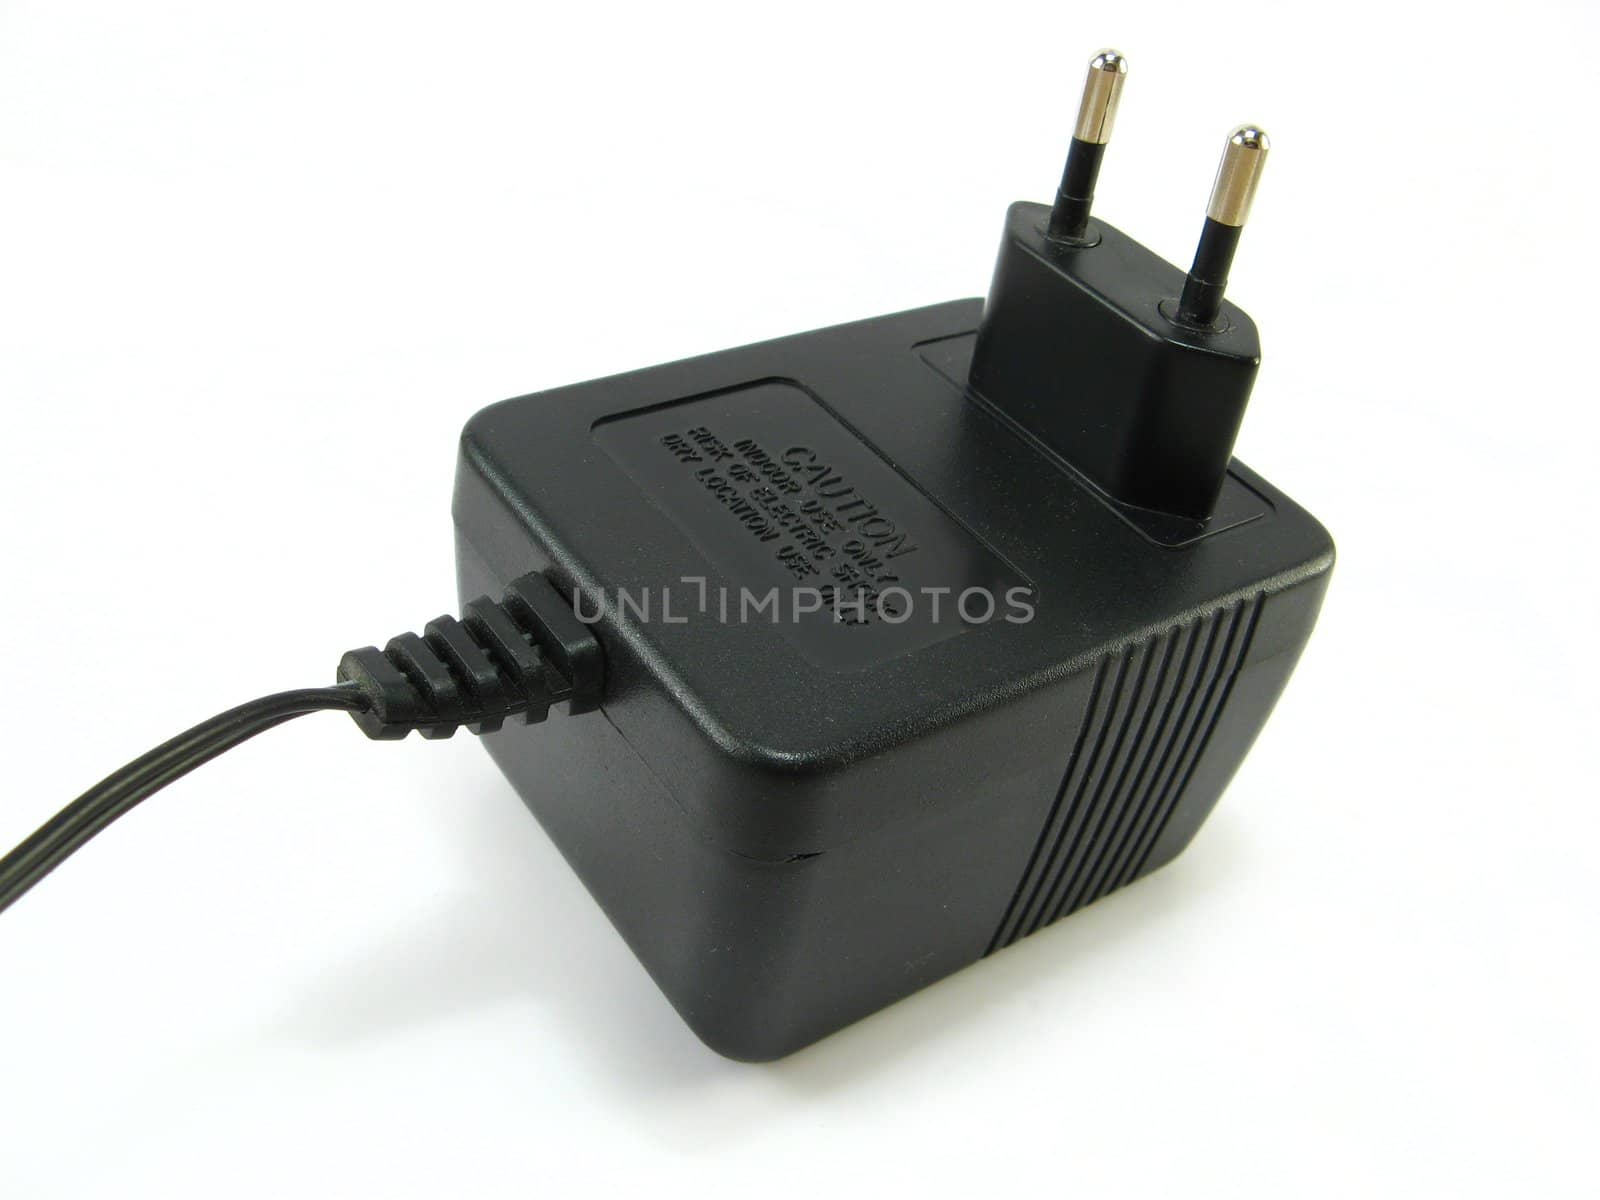 image of a black power supply on a white background